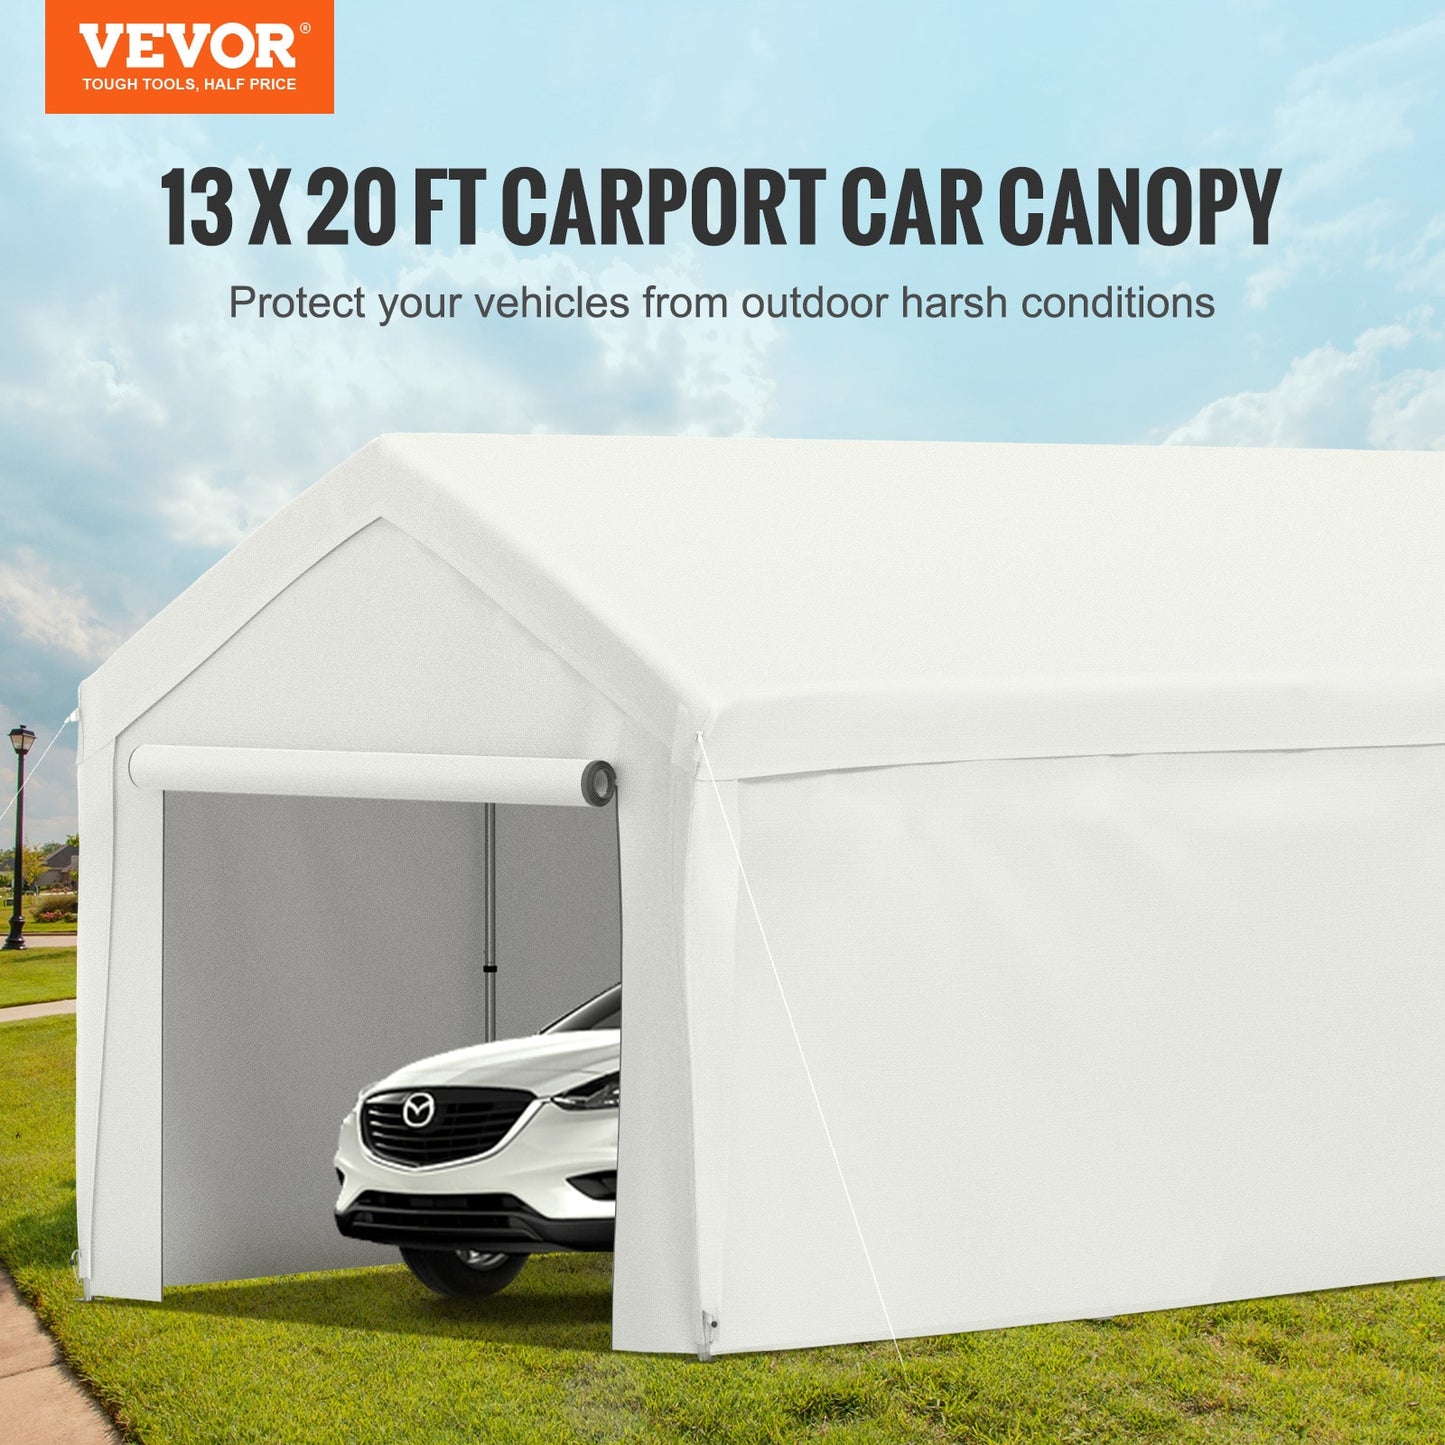 VEVOR Carport Canopy Instant Garage Tent Shelter Heavy Duty Foldable Car Sunshade Awning Waterproof Cover Boat,motorcycle,Car - youronestopstore23